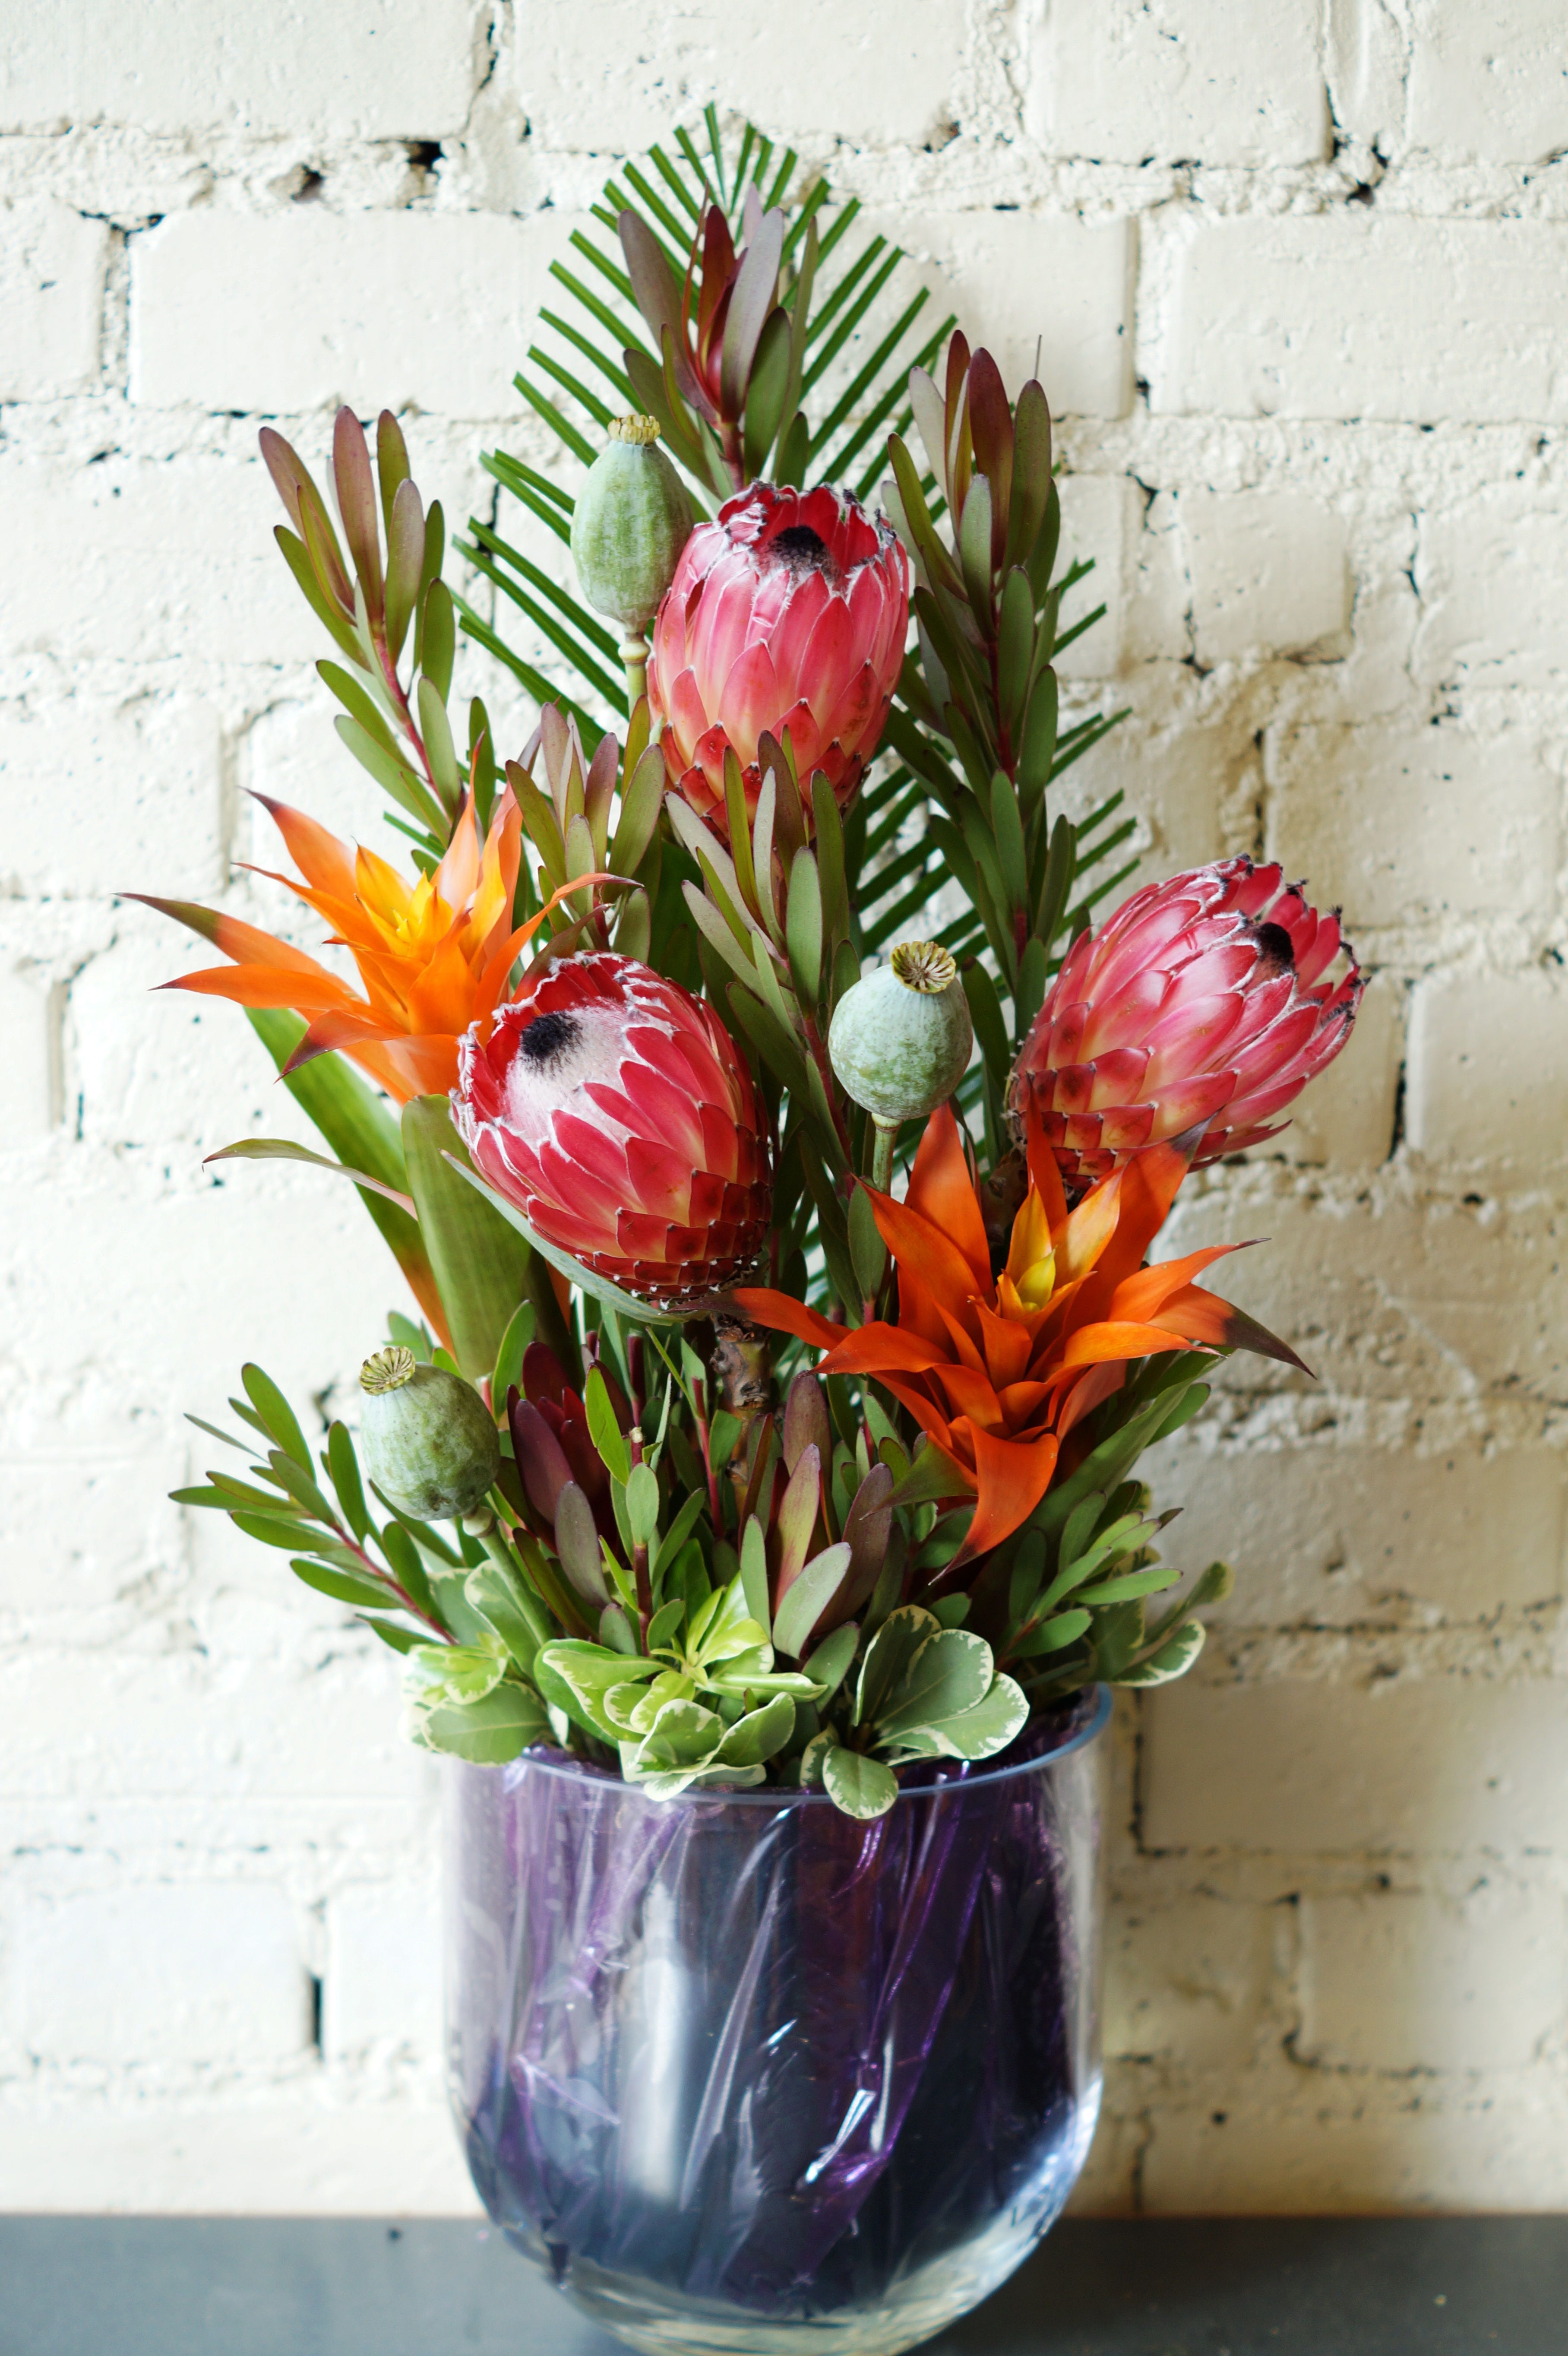 The main flowers used are orange Bromeliads and giant red Protea ...